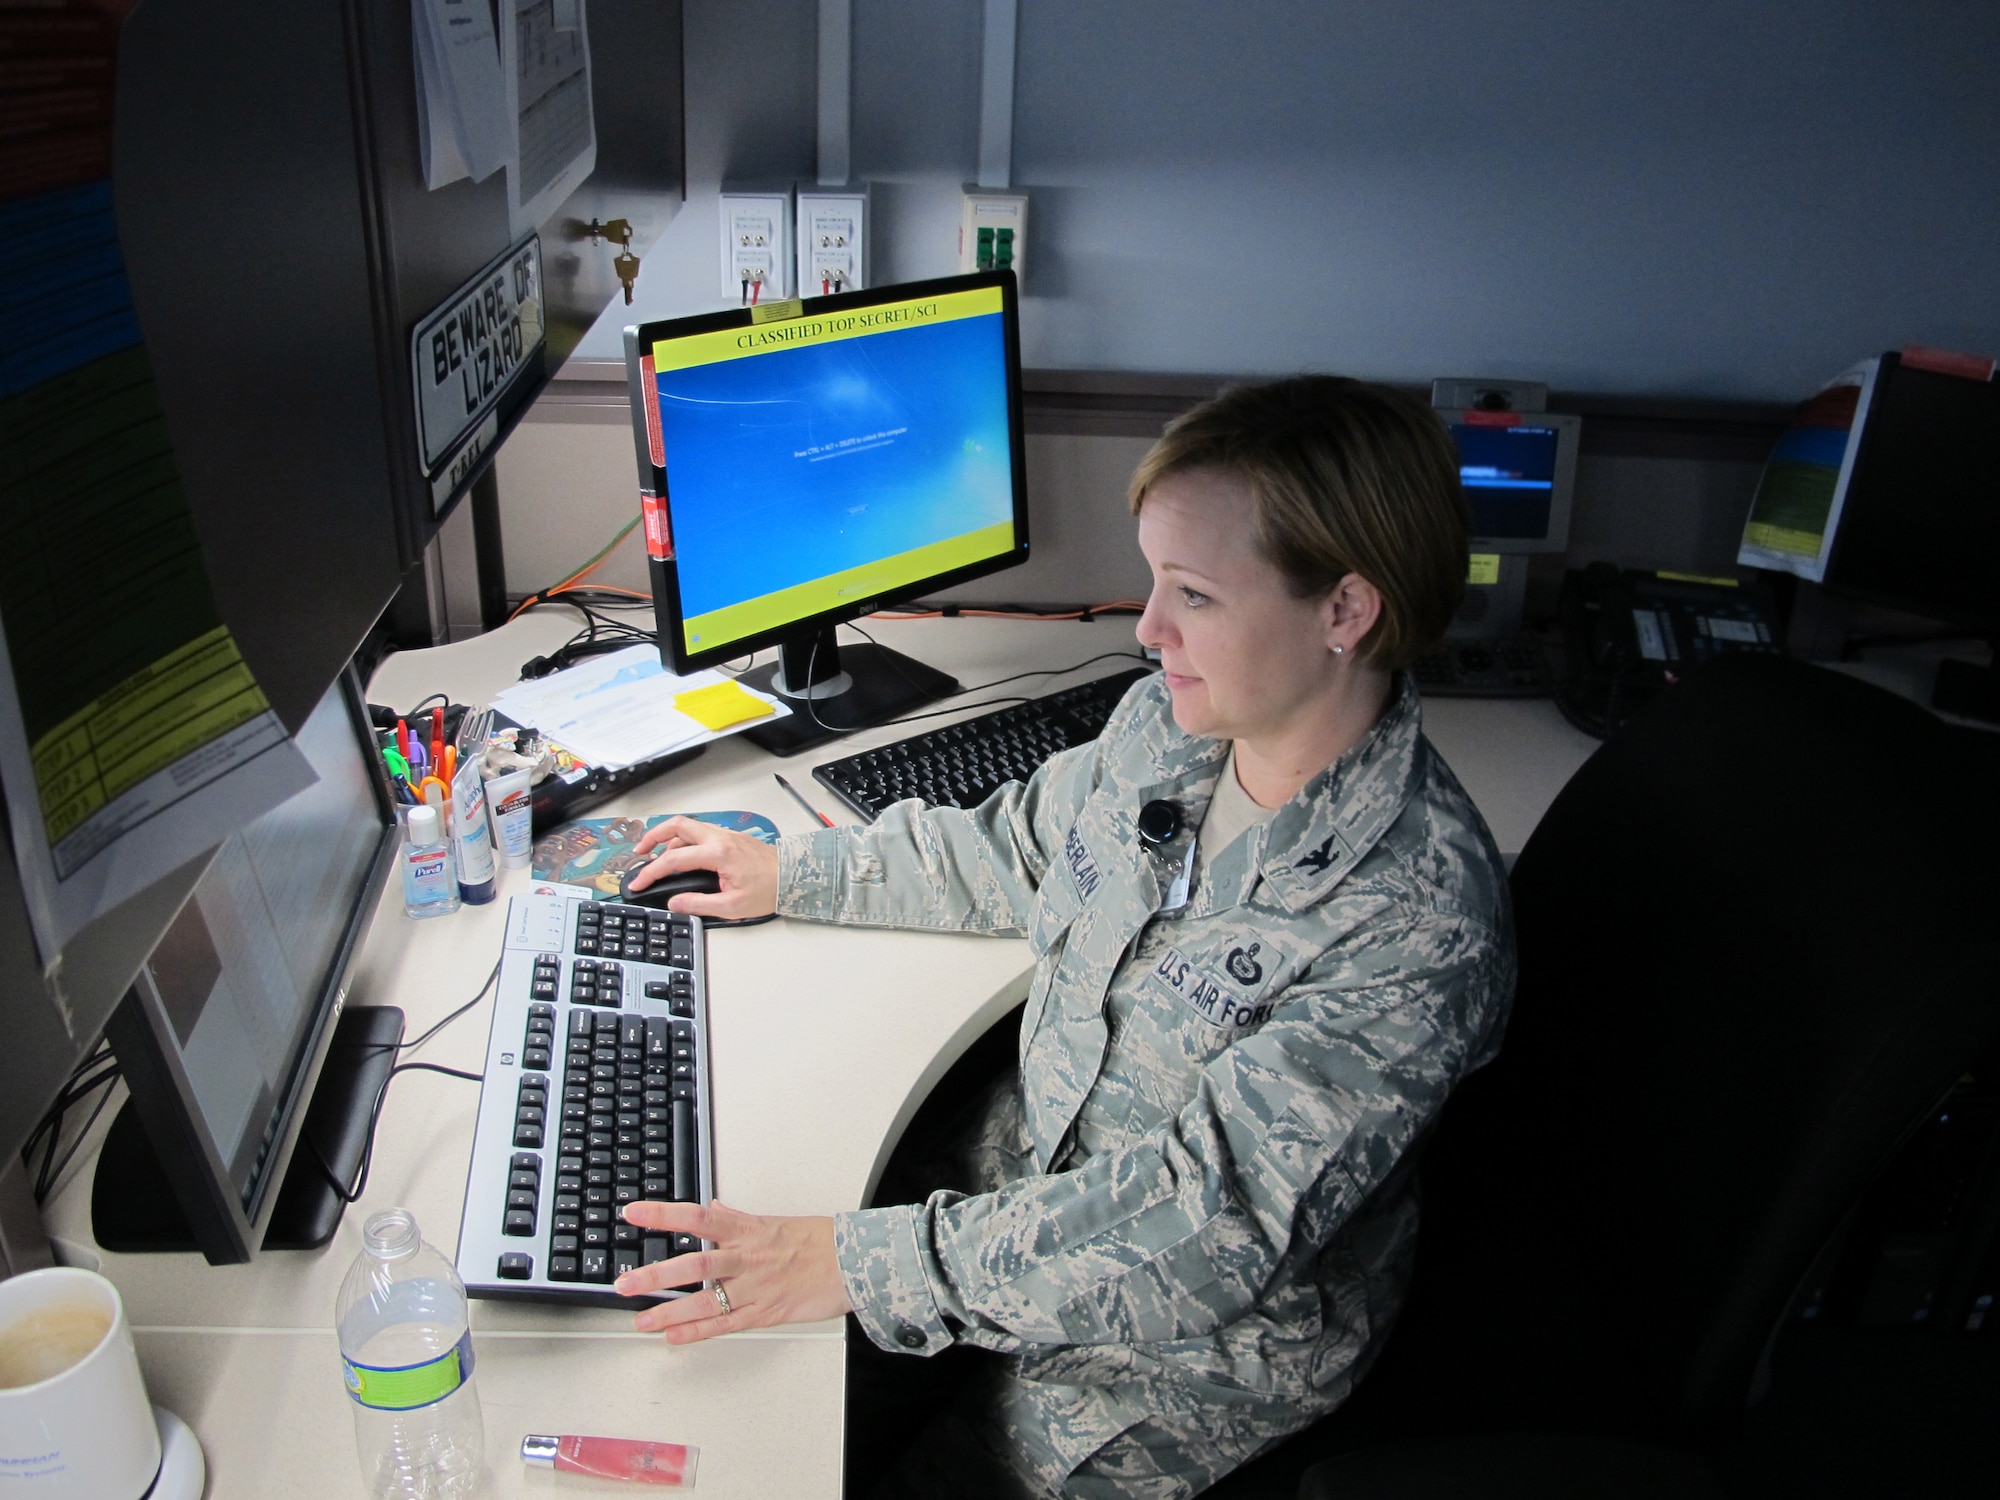 Col. Elizabeth Chamberlain, the Individual Mobilization Augmentee to the director of intelligence at 7th Air Force, brings a broad perspective on Air Force life and a specific knowledge of planned targeting to her intelligence community. In addition to her duties as an intelligence officer, this mother of two is a military spouse who actively volunteers with a number of women's leadership organizations, serves as an Air Force Academy Liaison Officer, and is actively involved in her community and kid's school. (U.S. Air Force Photo)